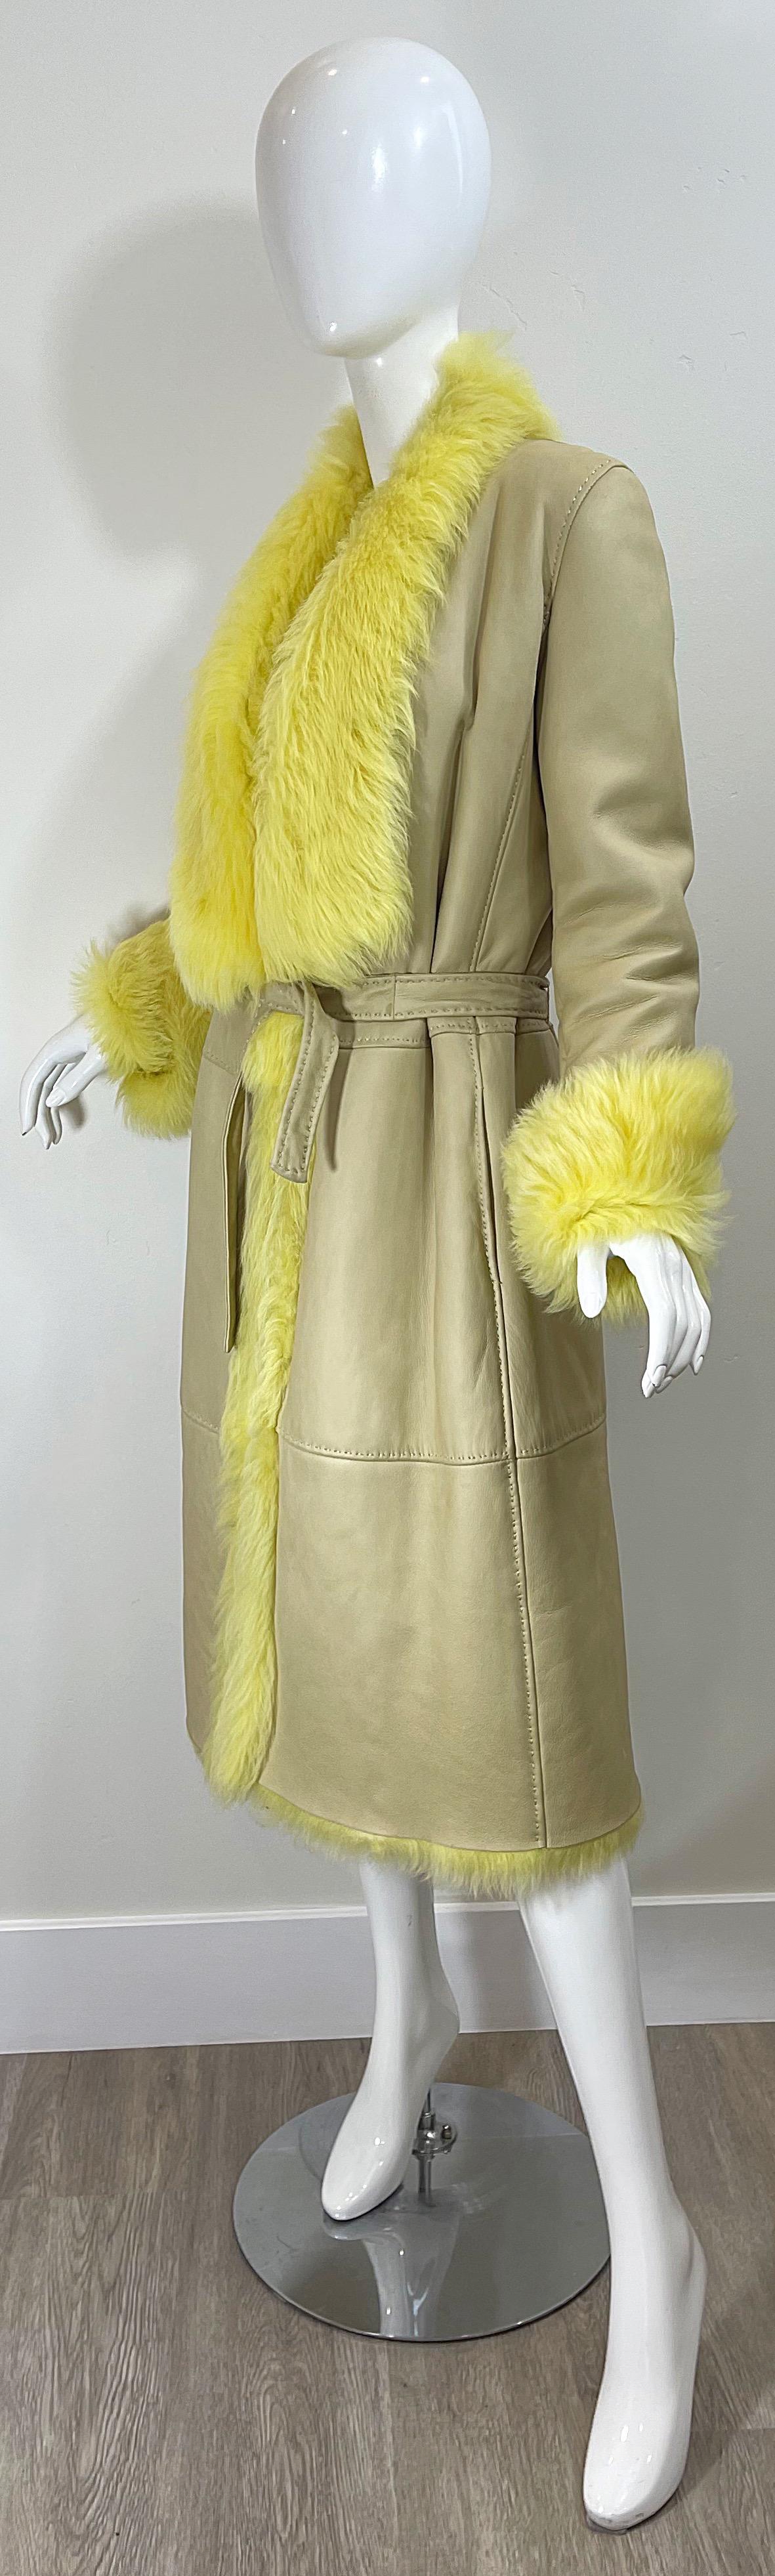 1990s Gianni Versace Tan Leather Yellow Shearling Fur Vintage Trench Coat Jacket For Sale 3